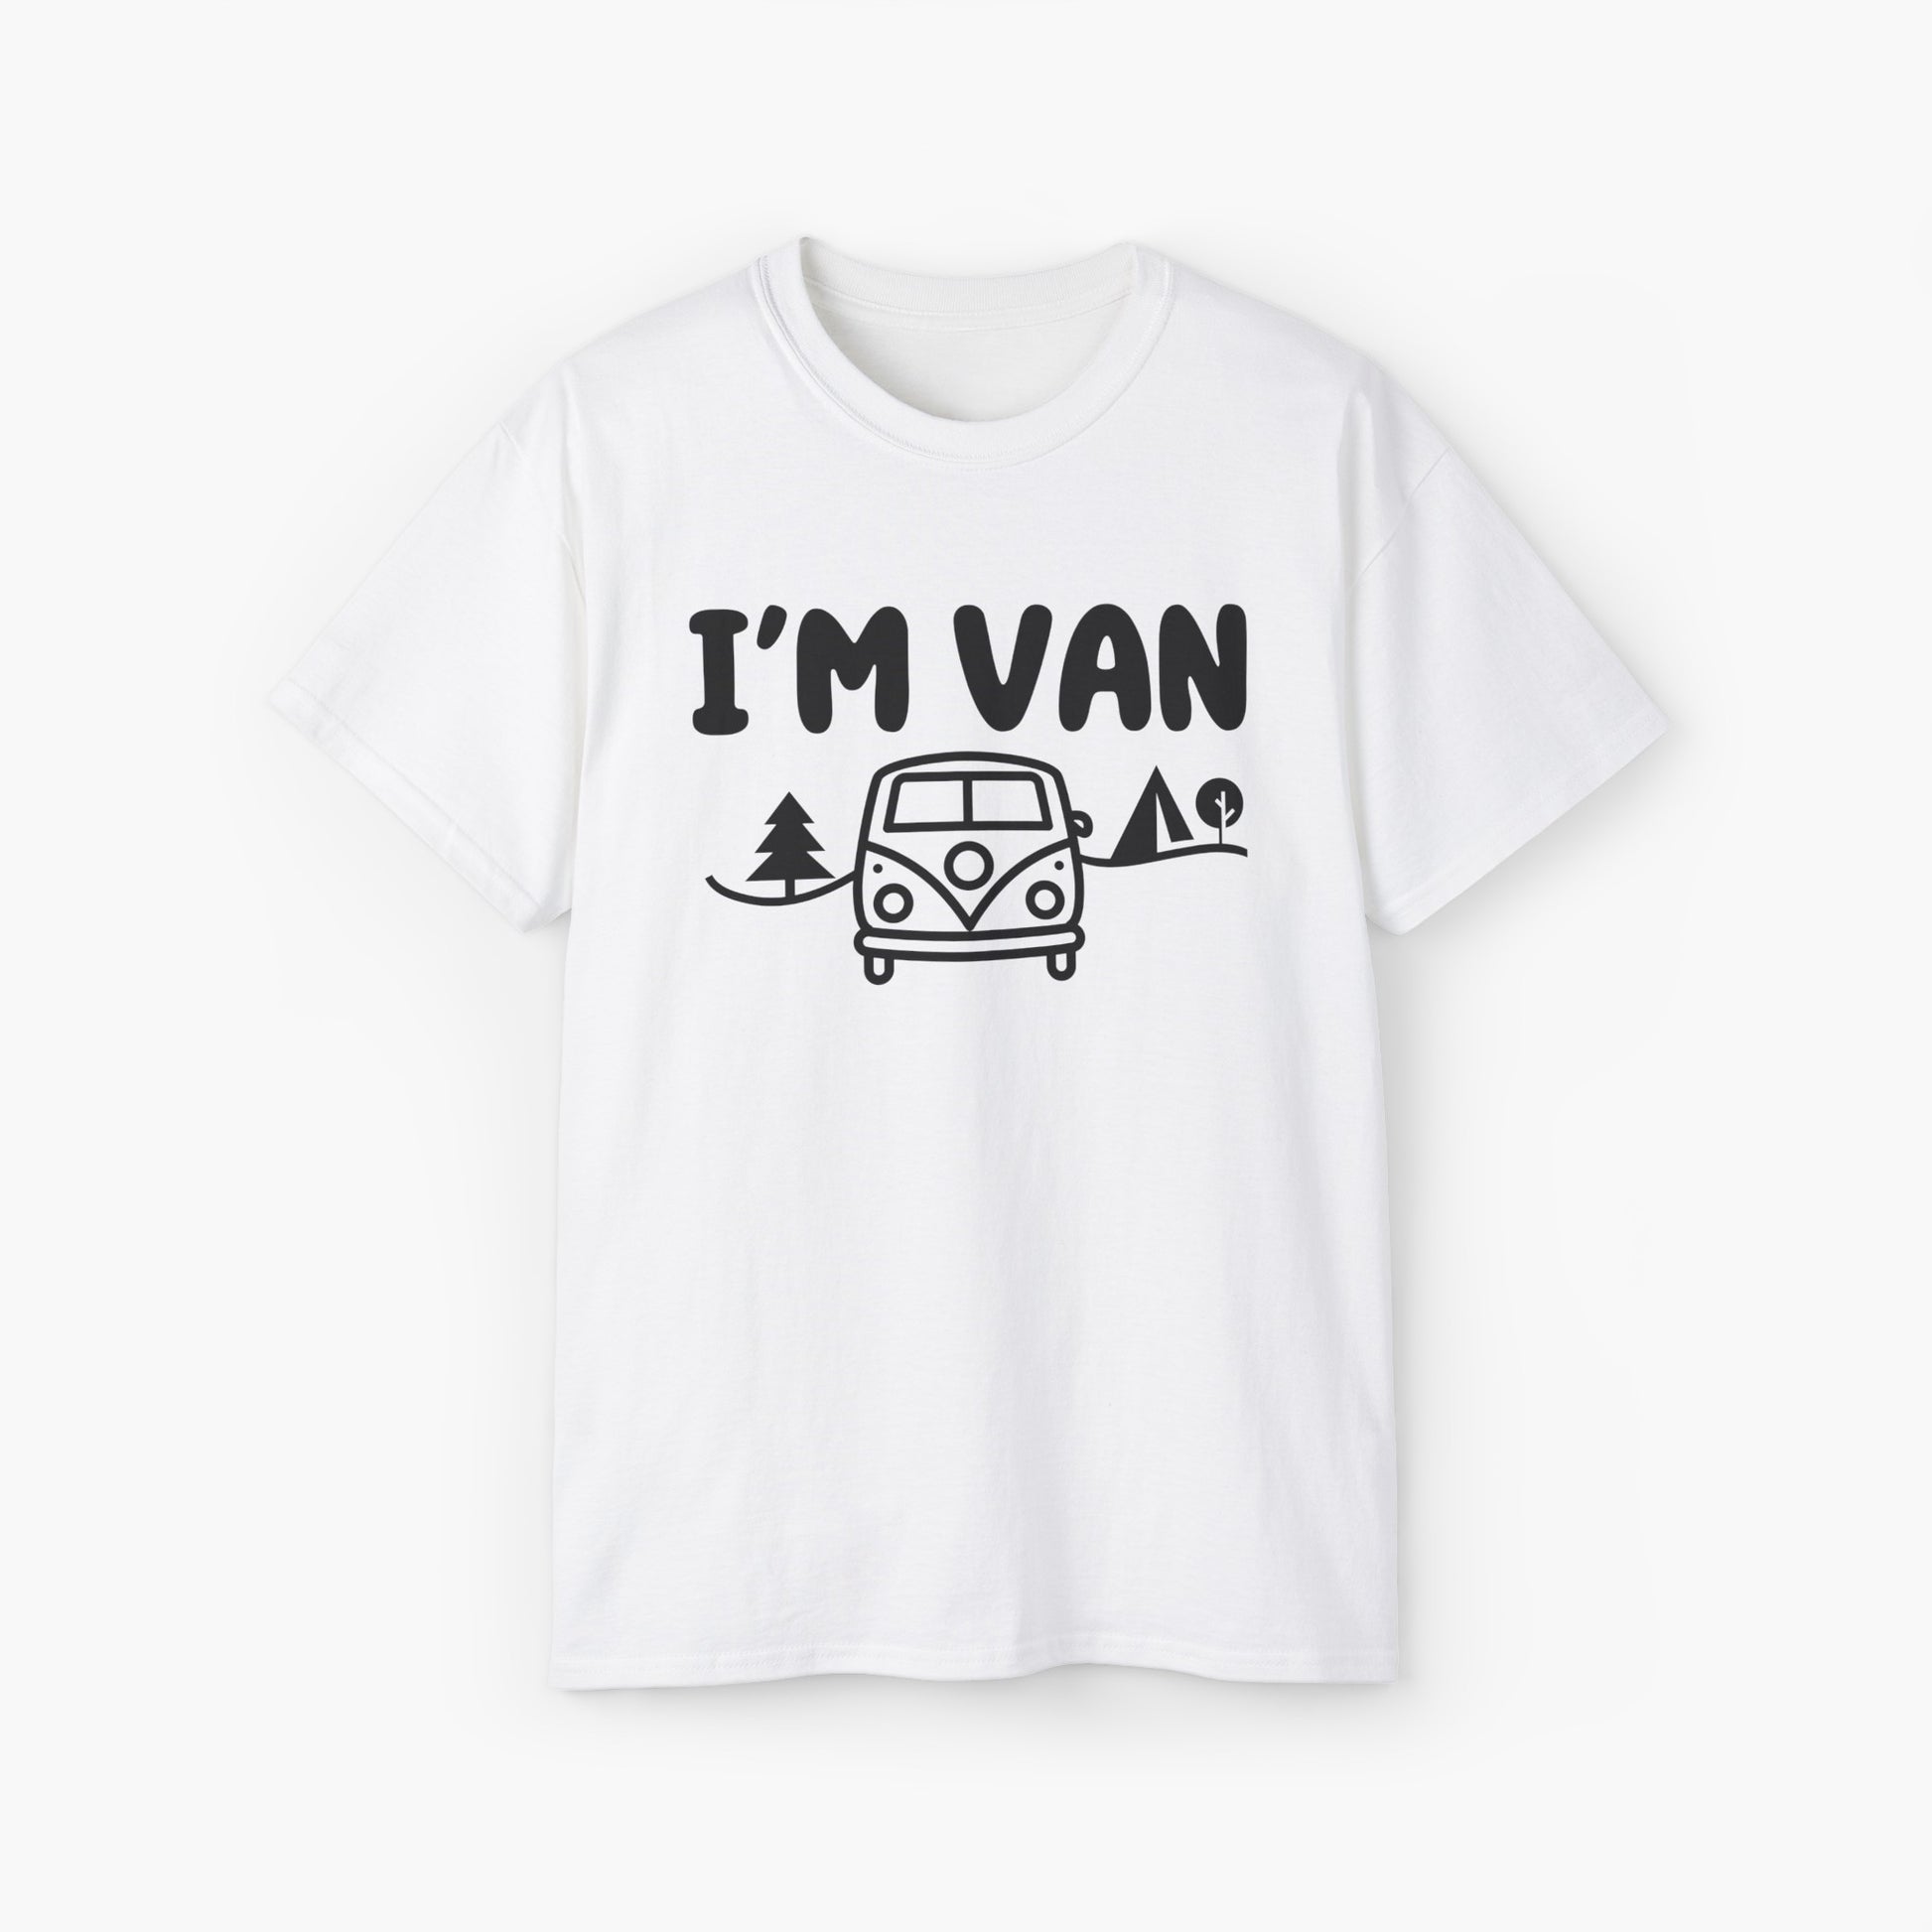 White t-shirt with the text 'I'm Van' featuring a graphic of a van surrounded by trees on a plain background.